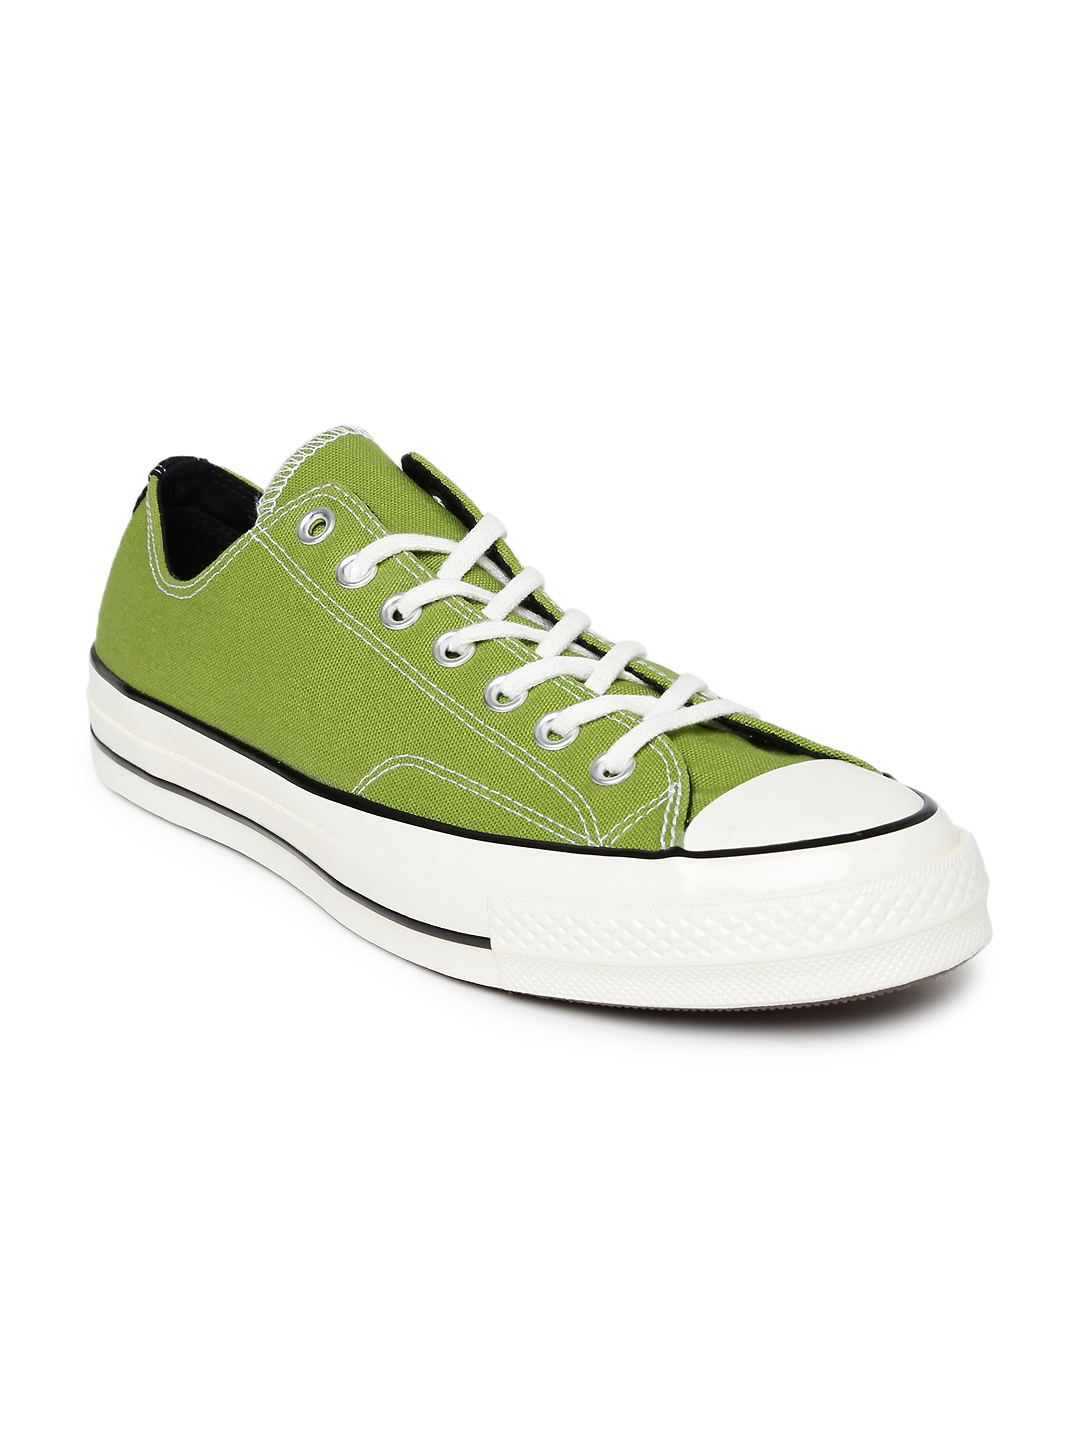 Buy Converse Unisex Green Sneakers - Casual Shoes for Unisex 1412262 ...